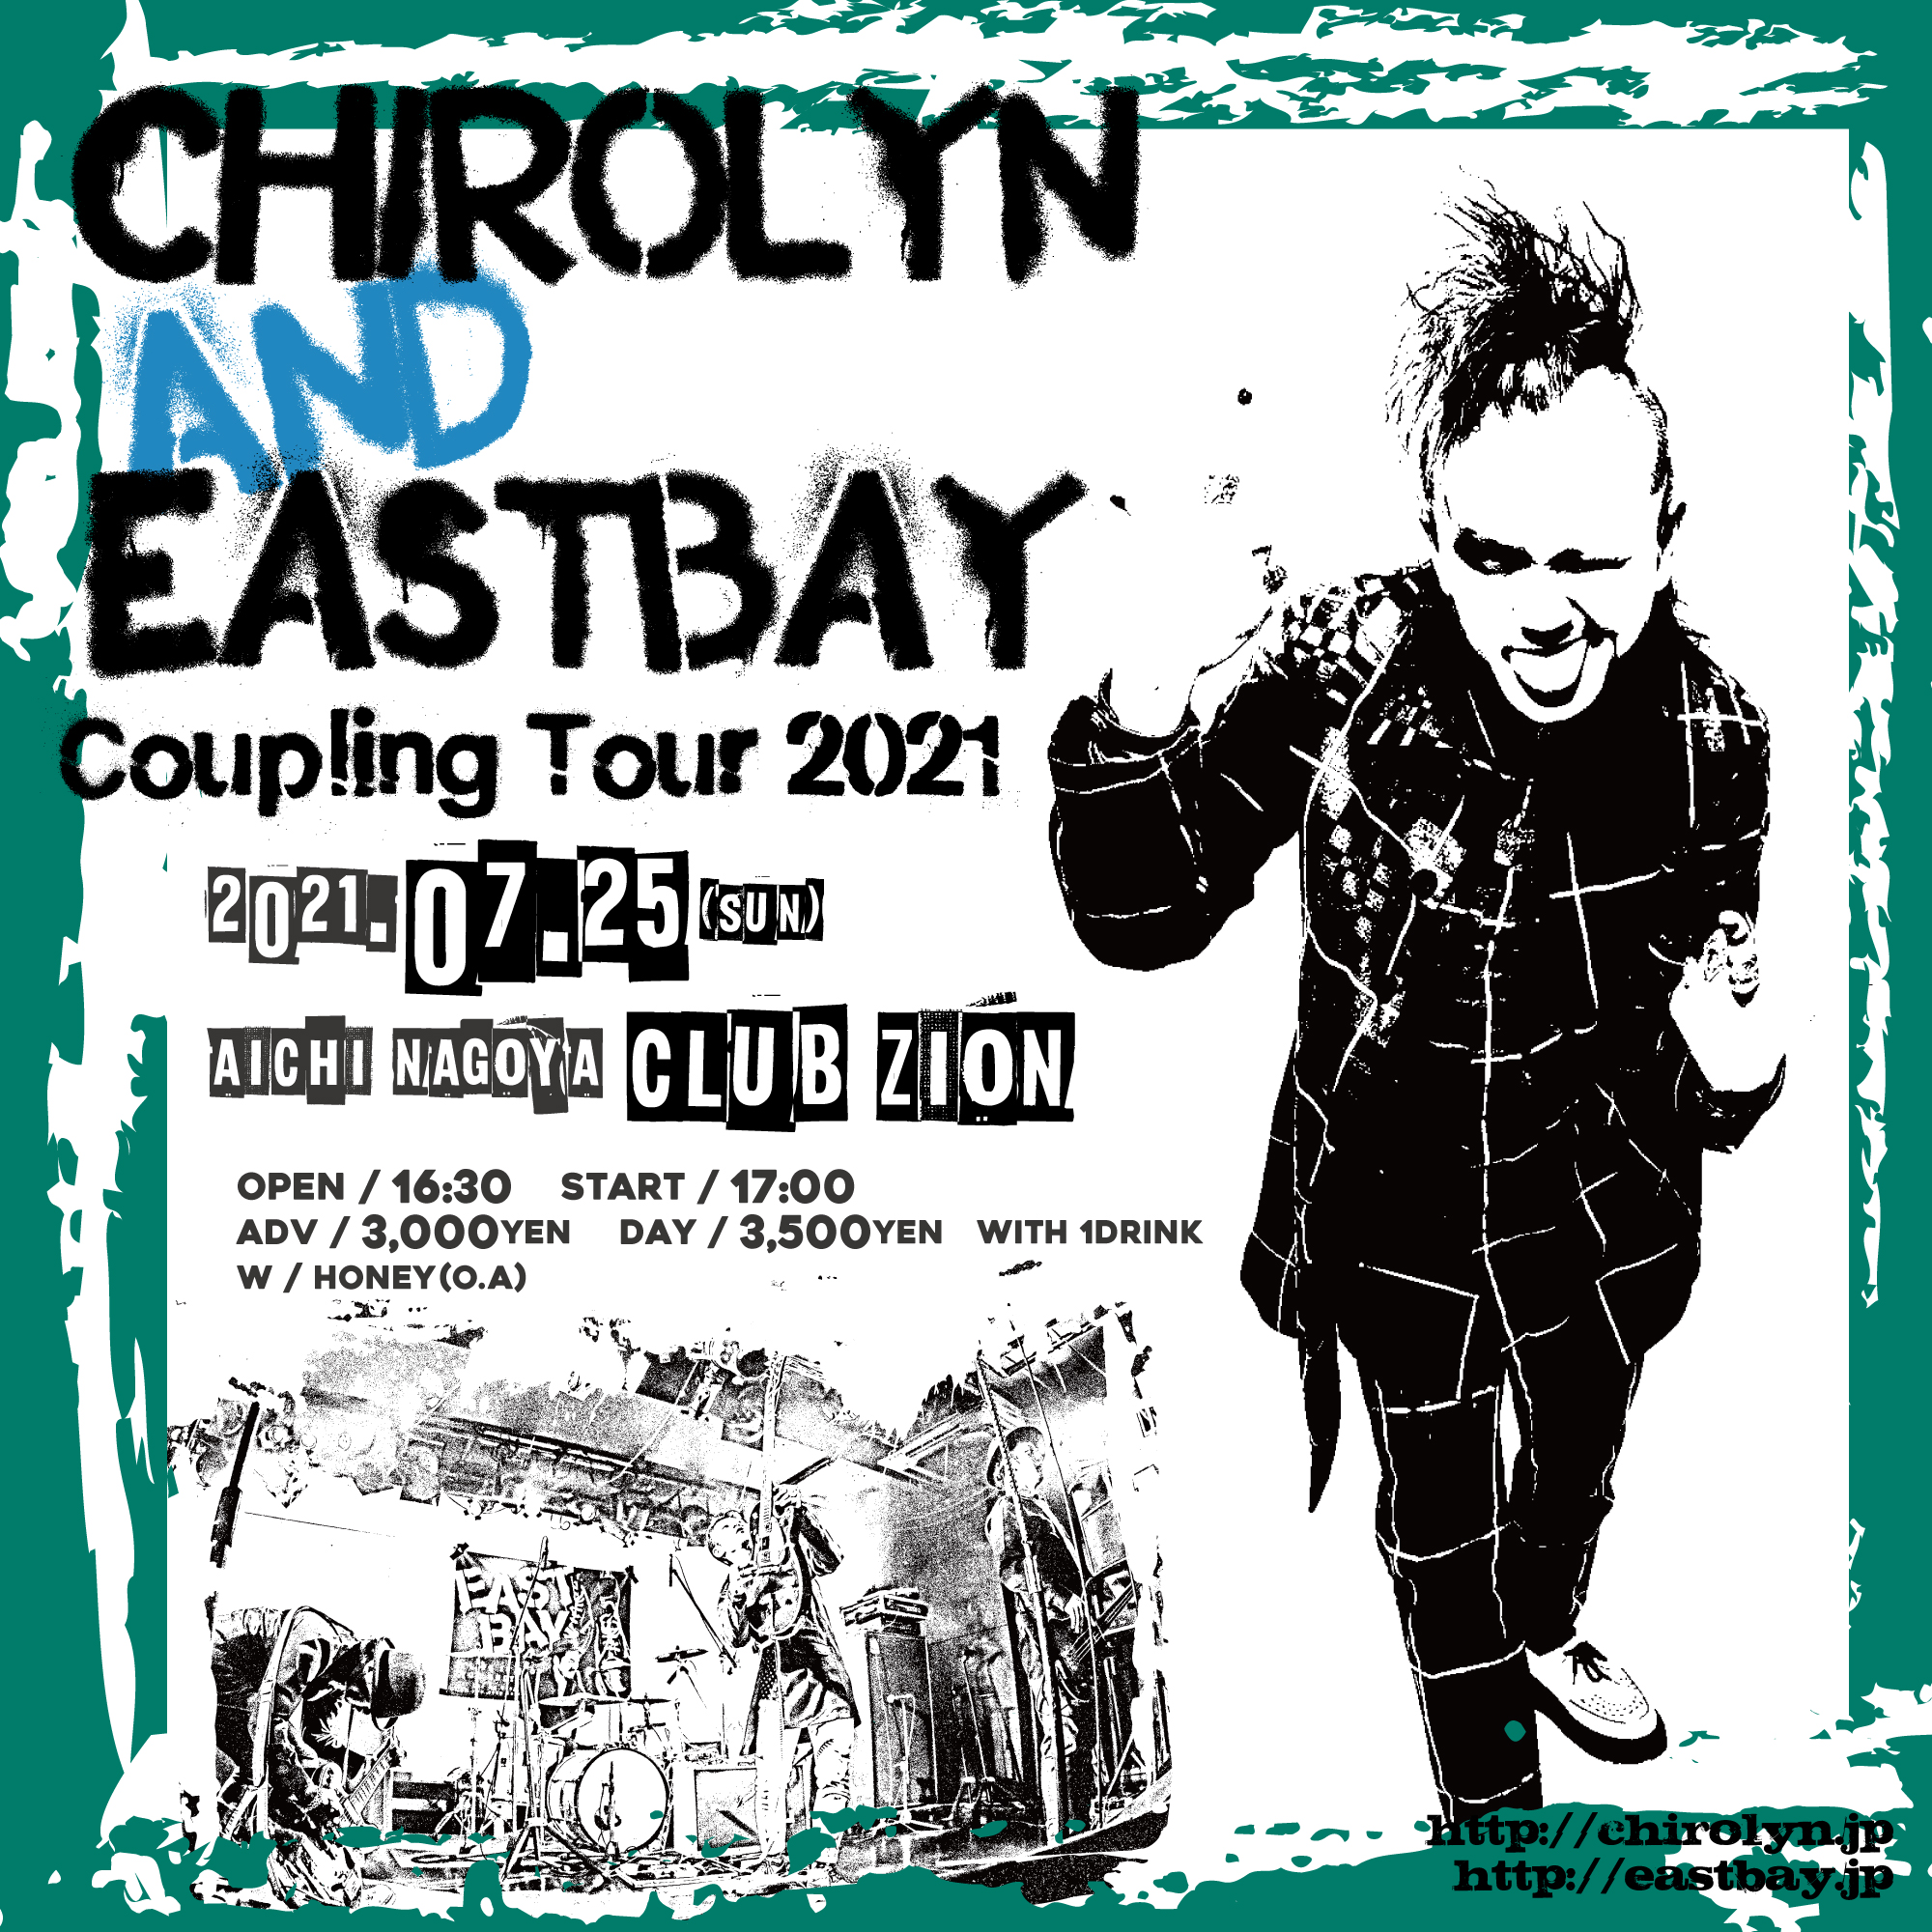 Chirolyn & EASTBAY Coupling Tour 2021 in 名古屋の写真